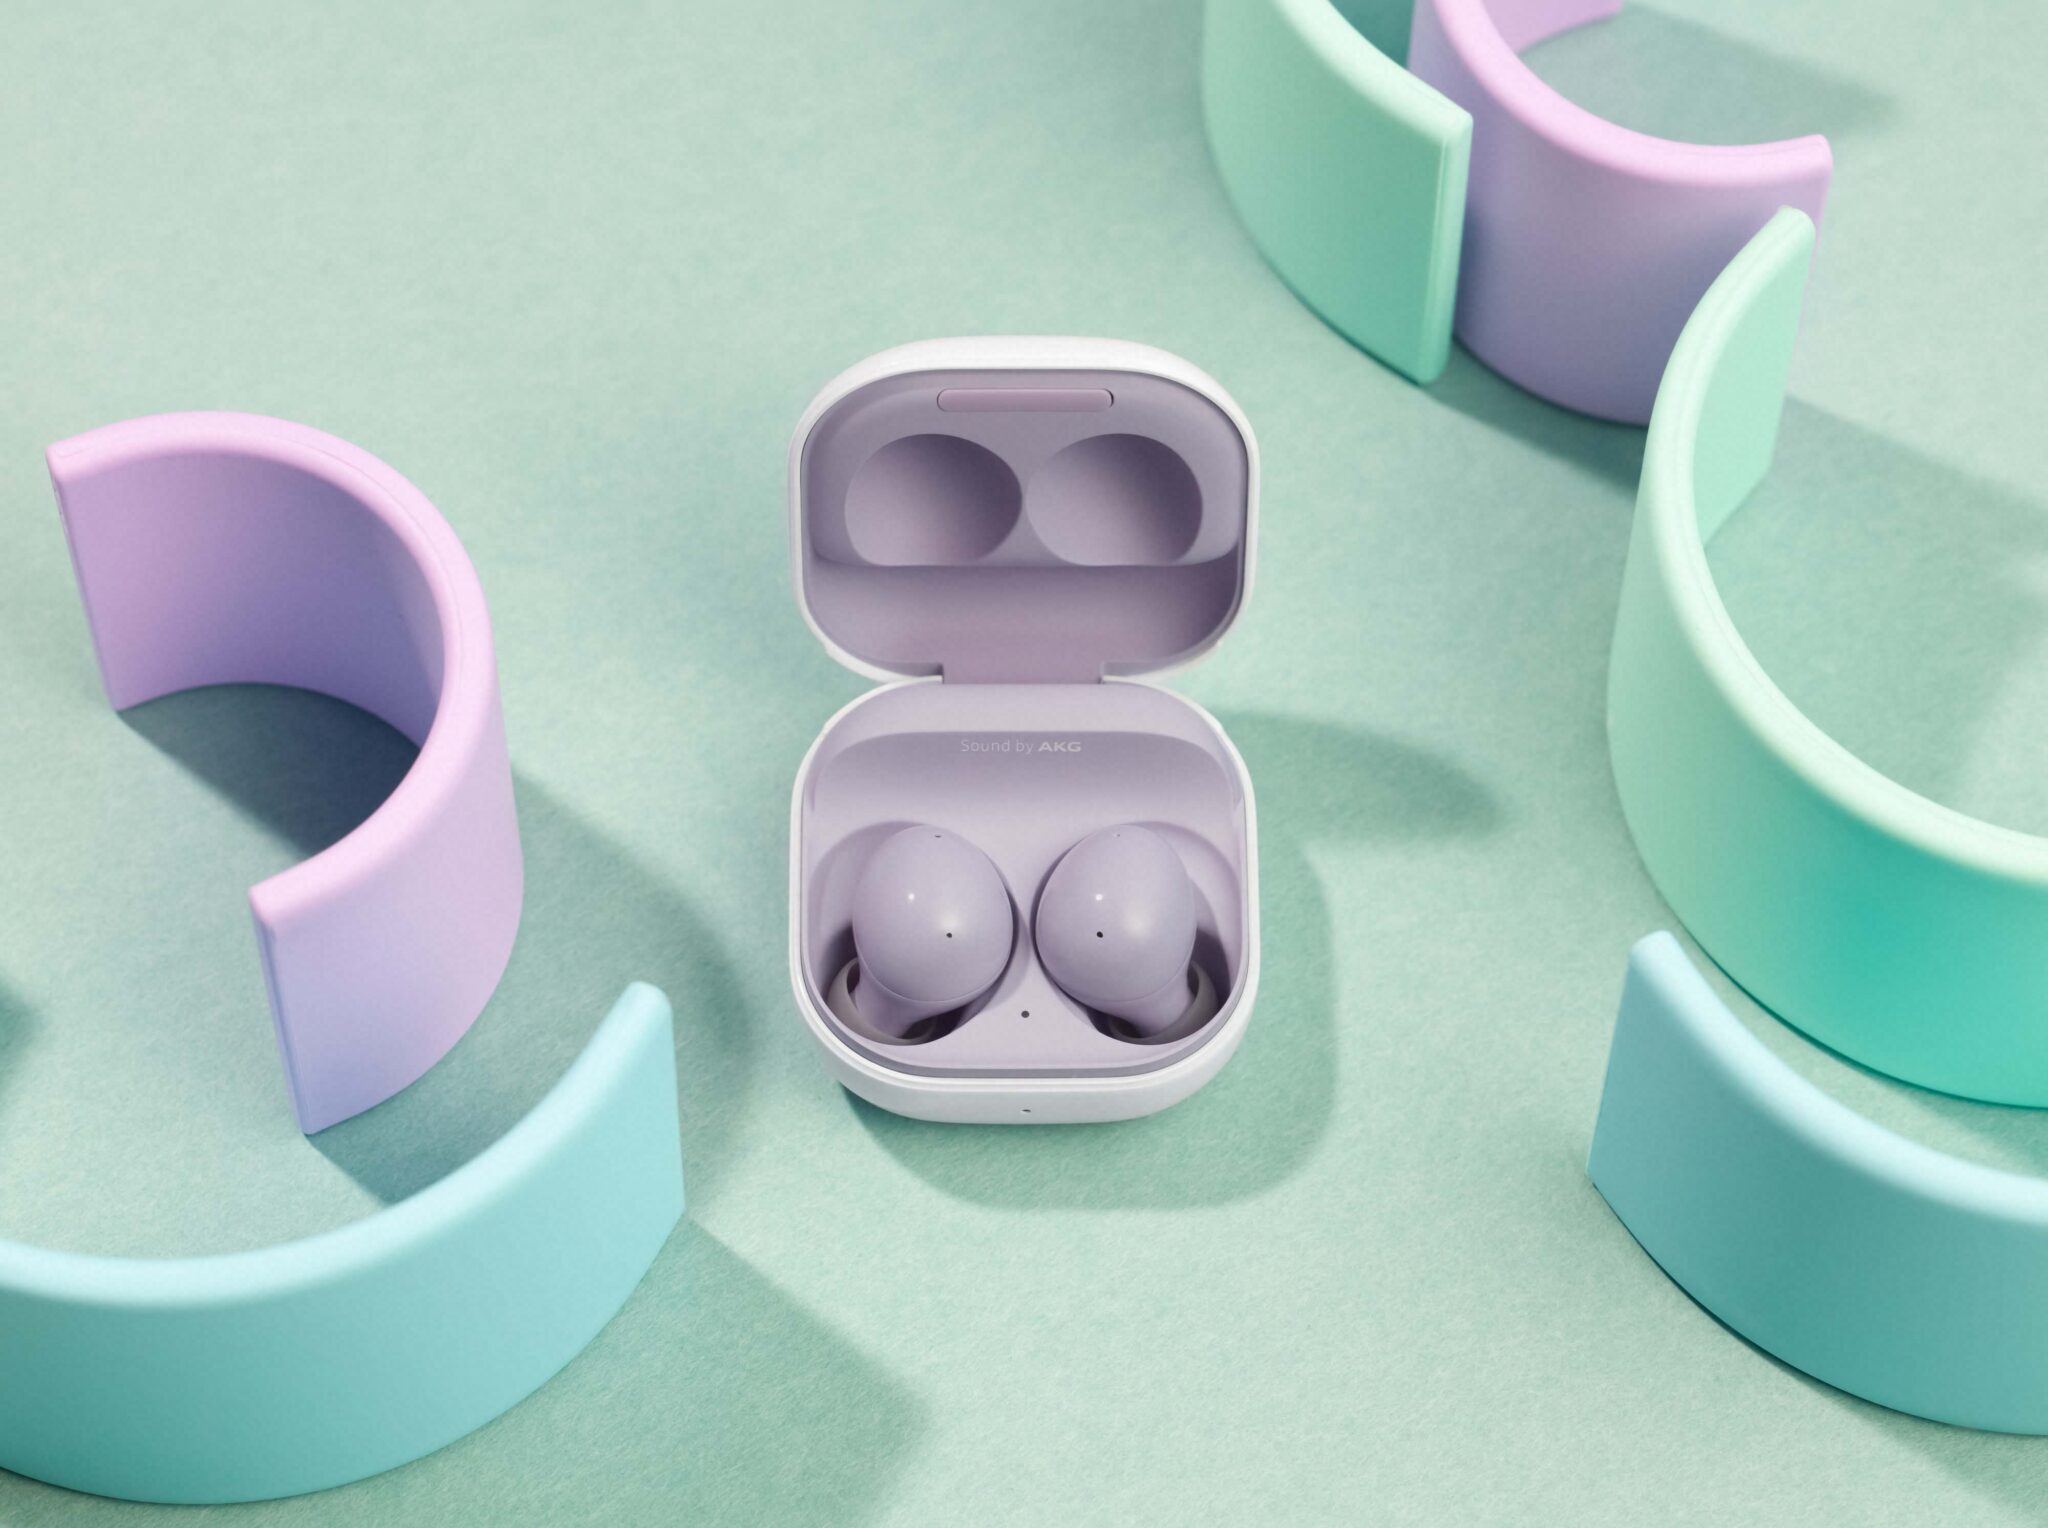 02 01 Berry product 05 galaxybuds2 lavender L 2048x1528 1